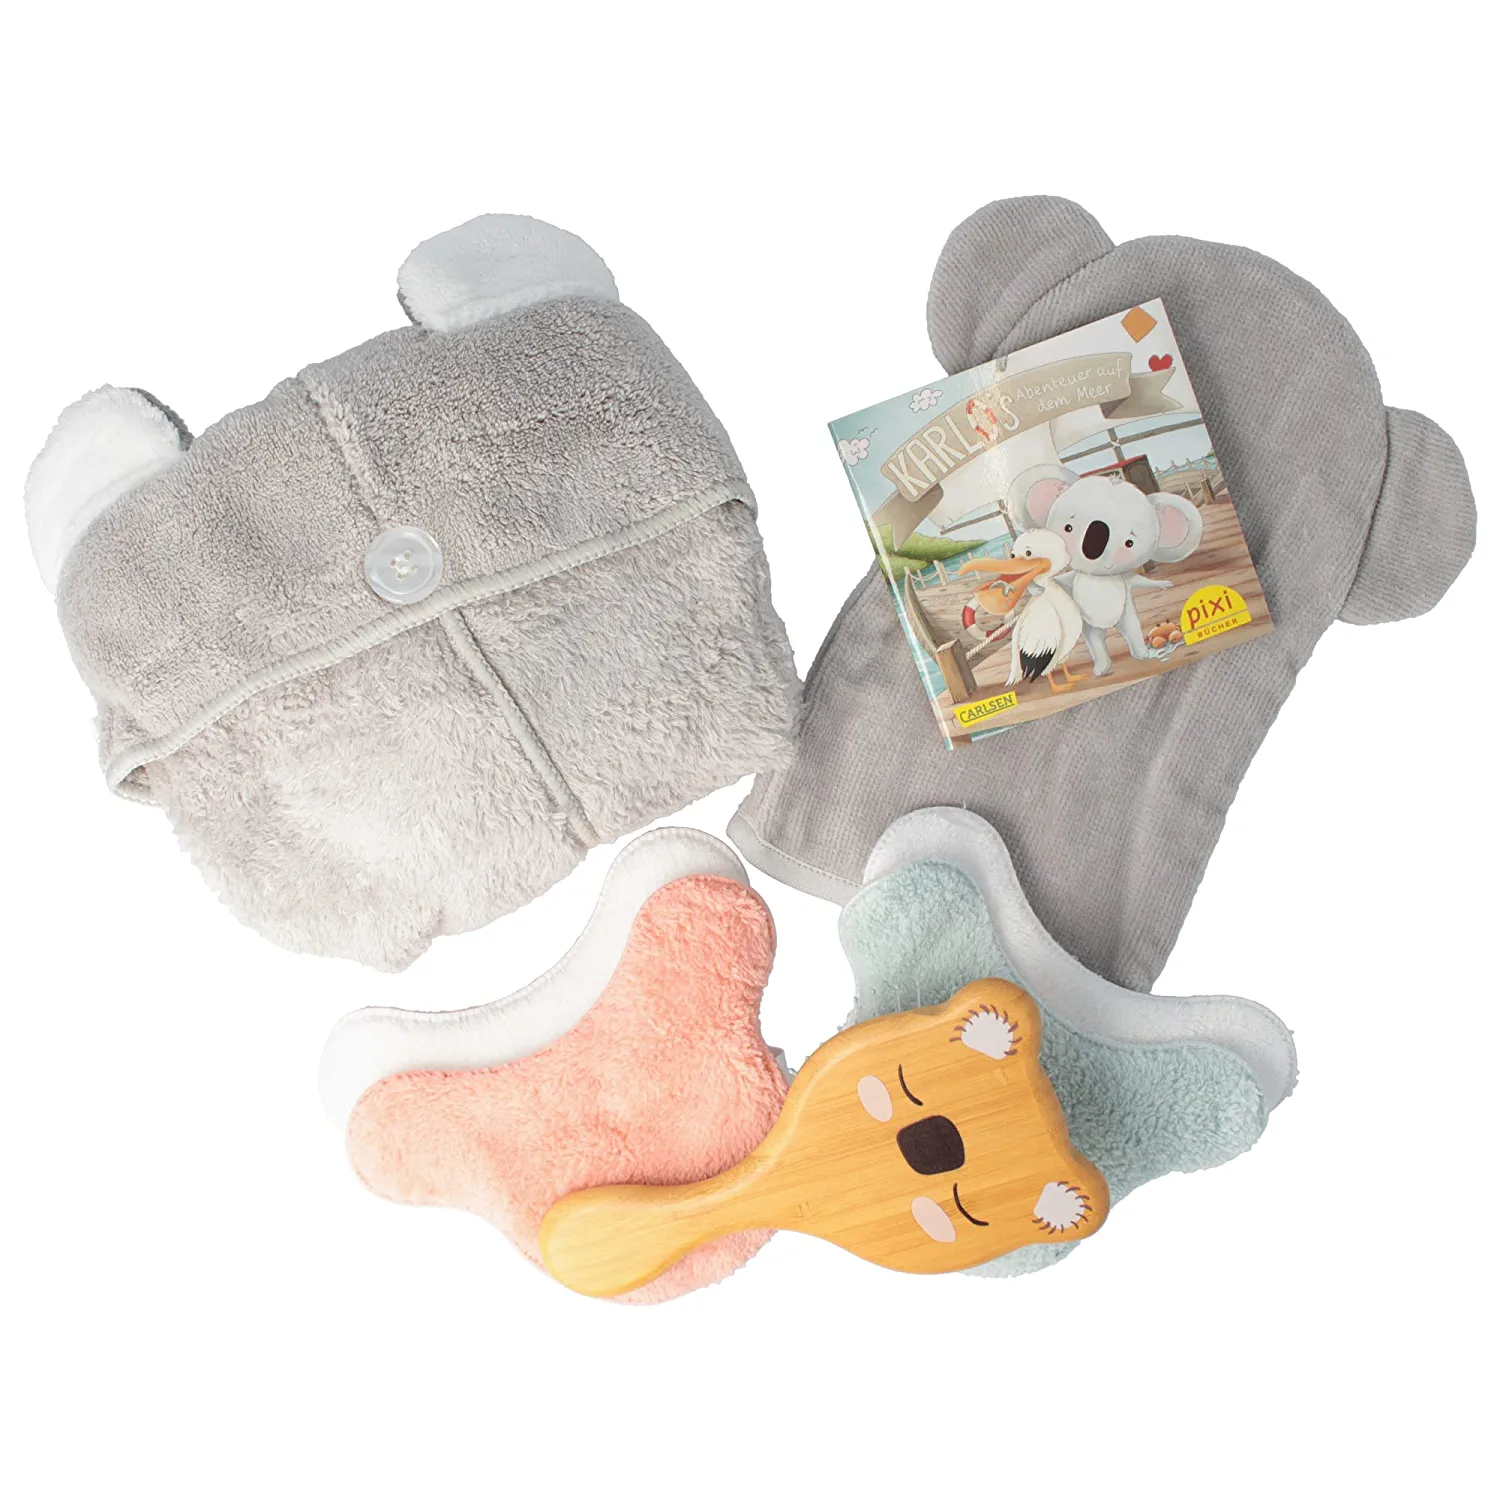 PARSA Beauty Nature Kids Ludwigs Favourite Set - Wash Mitt, Cleaning Pads, Hair Turban and Hair Brush for Children - Ideal Shower Accessory for Children with Book to Read